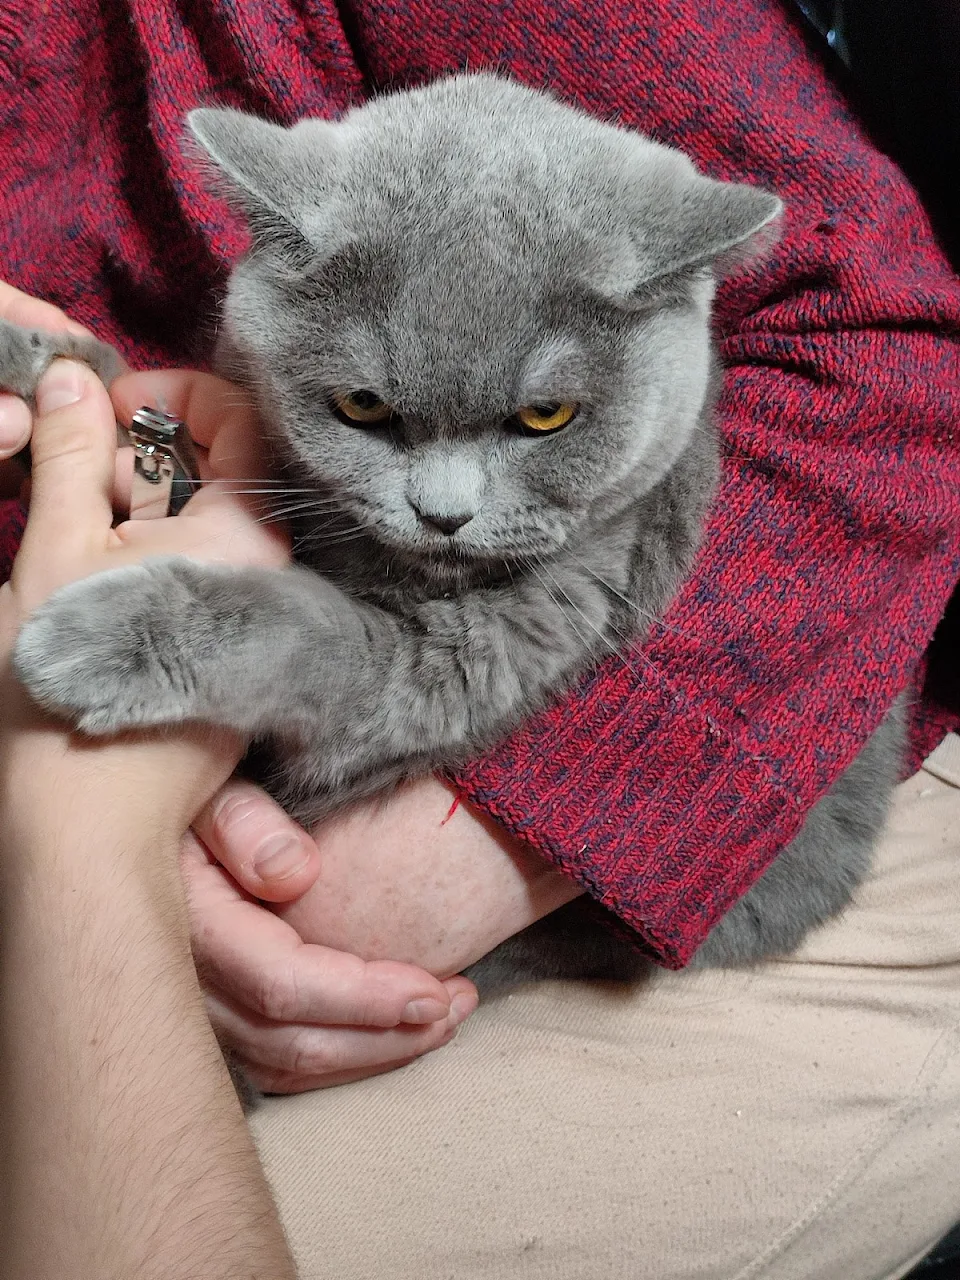 my relatives were trimming her nails...she was not happy